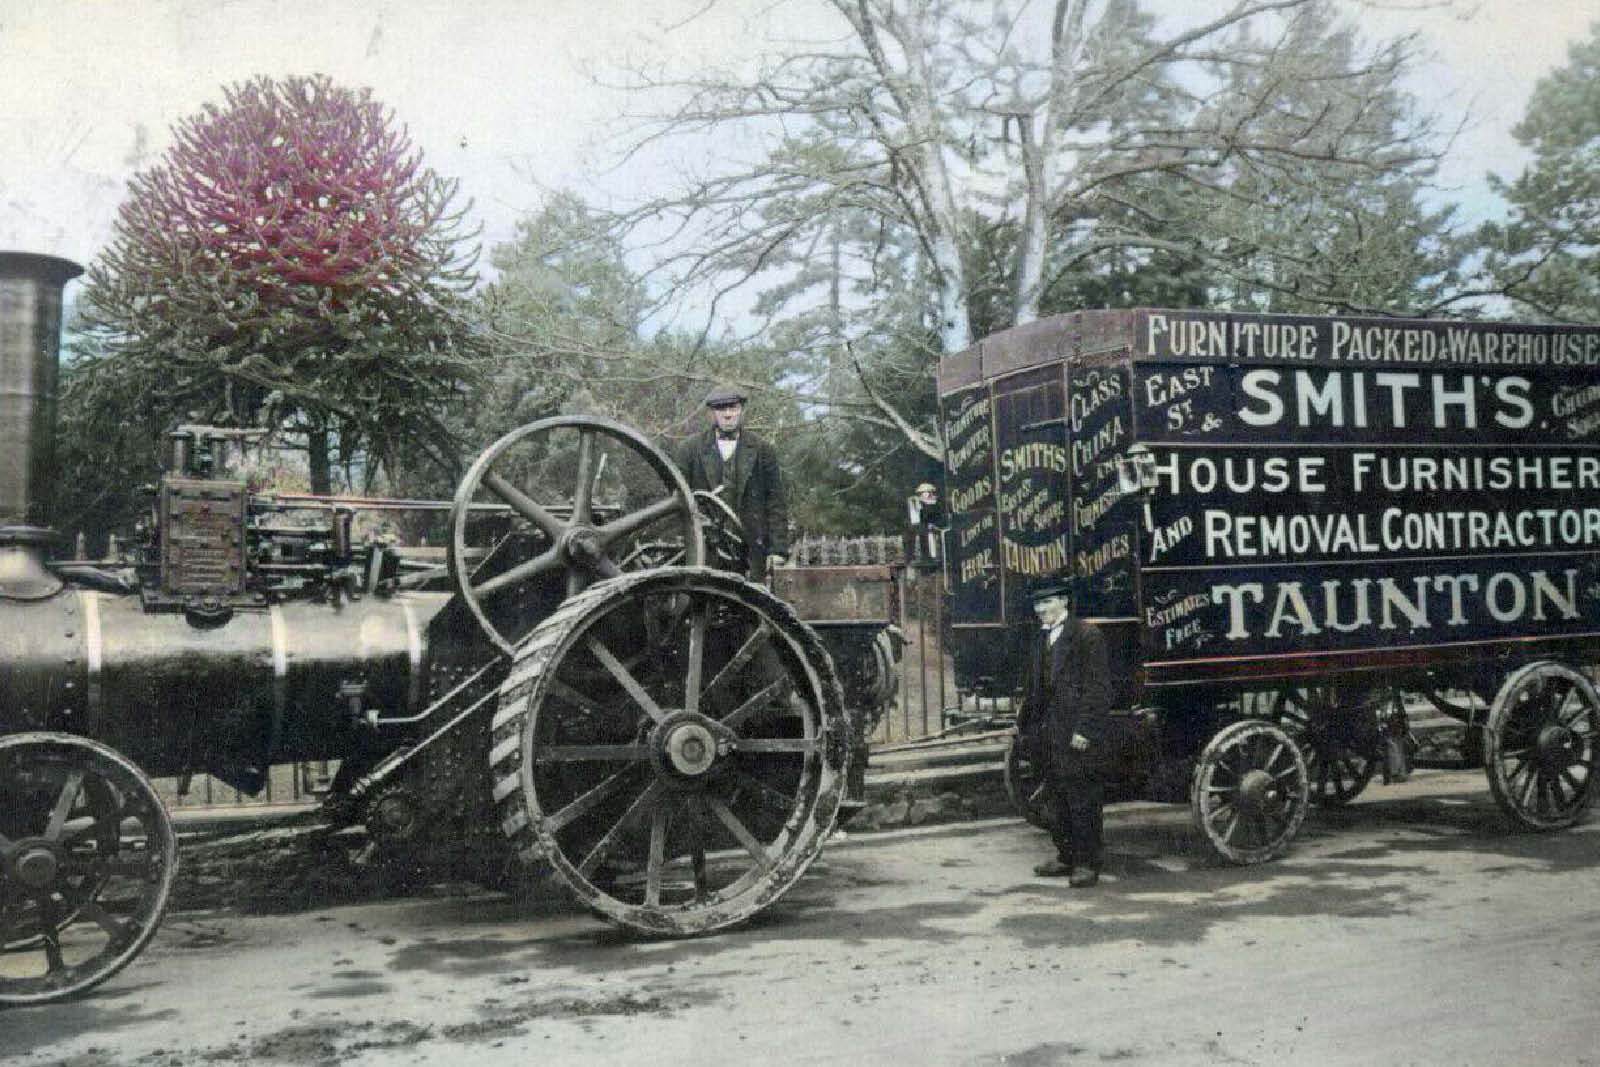 SMITHs house furnisher removal contractors 1914 Taunton Somerset